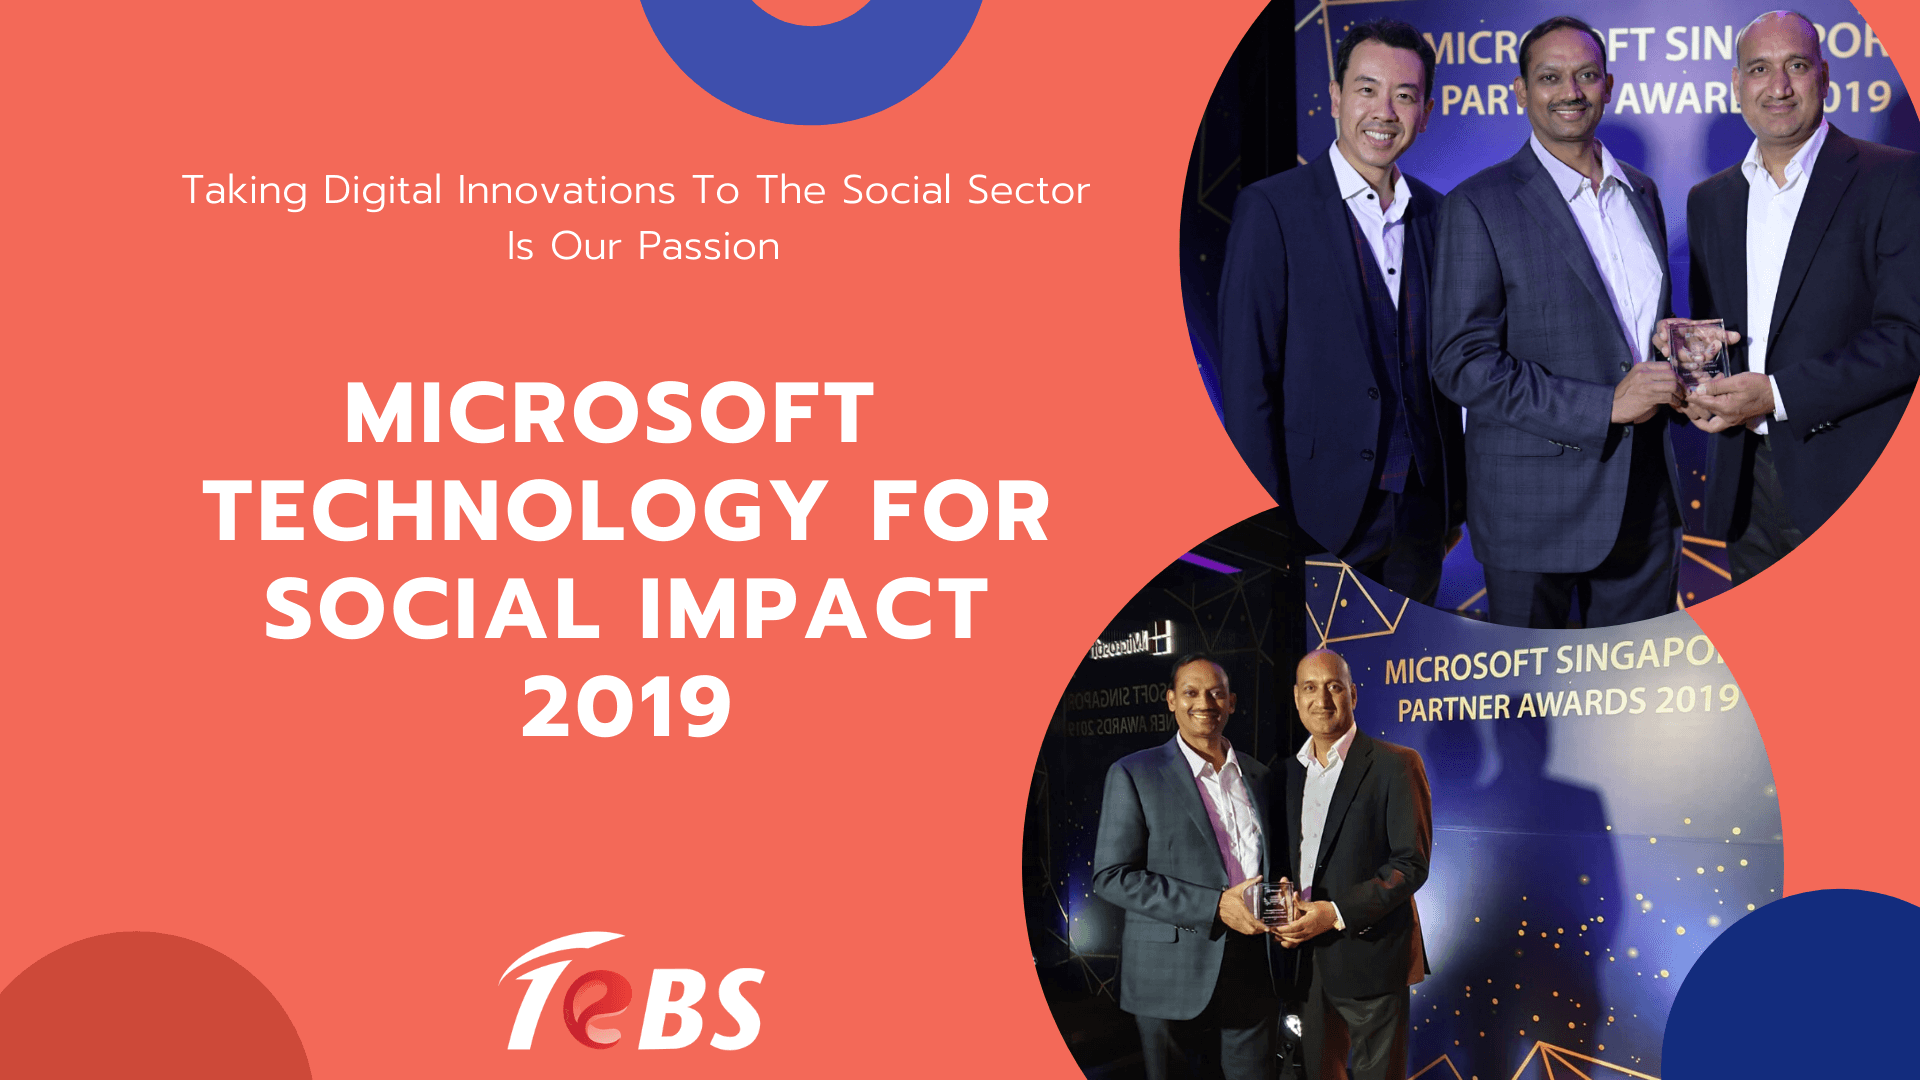 TeBS clinches 2019 Microsoft Singapore Partner Recognition Award in the Technology for Social Impact category